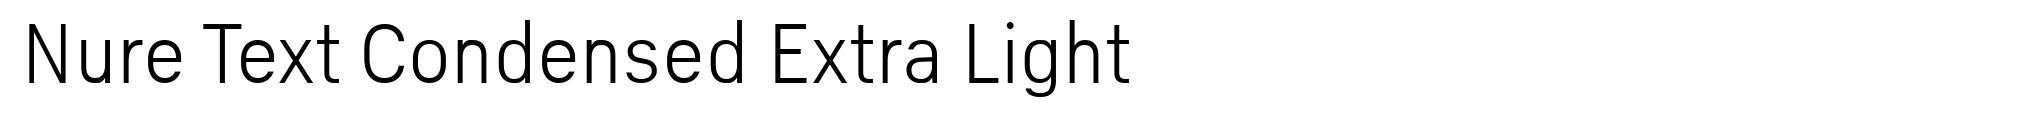 Nure Text Condensed Extra Light image